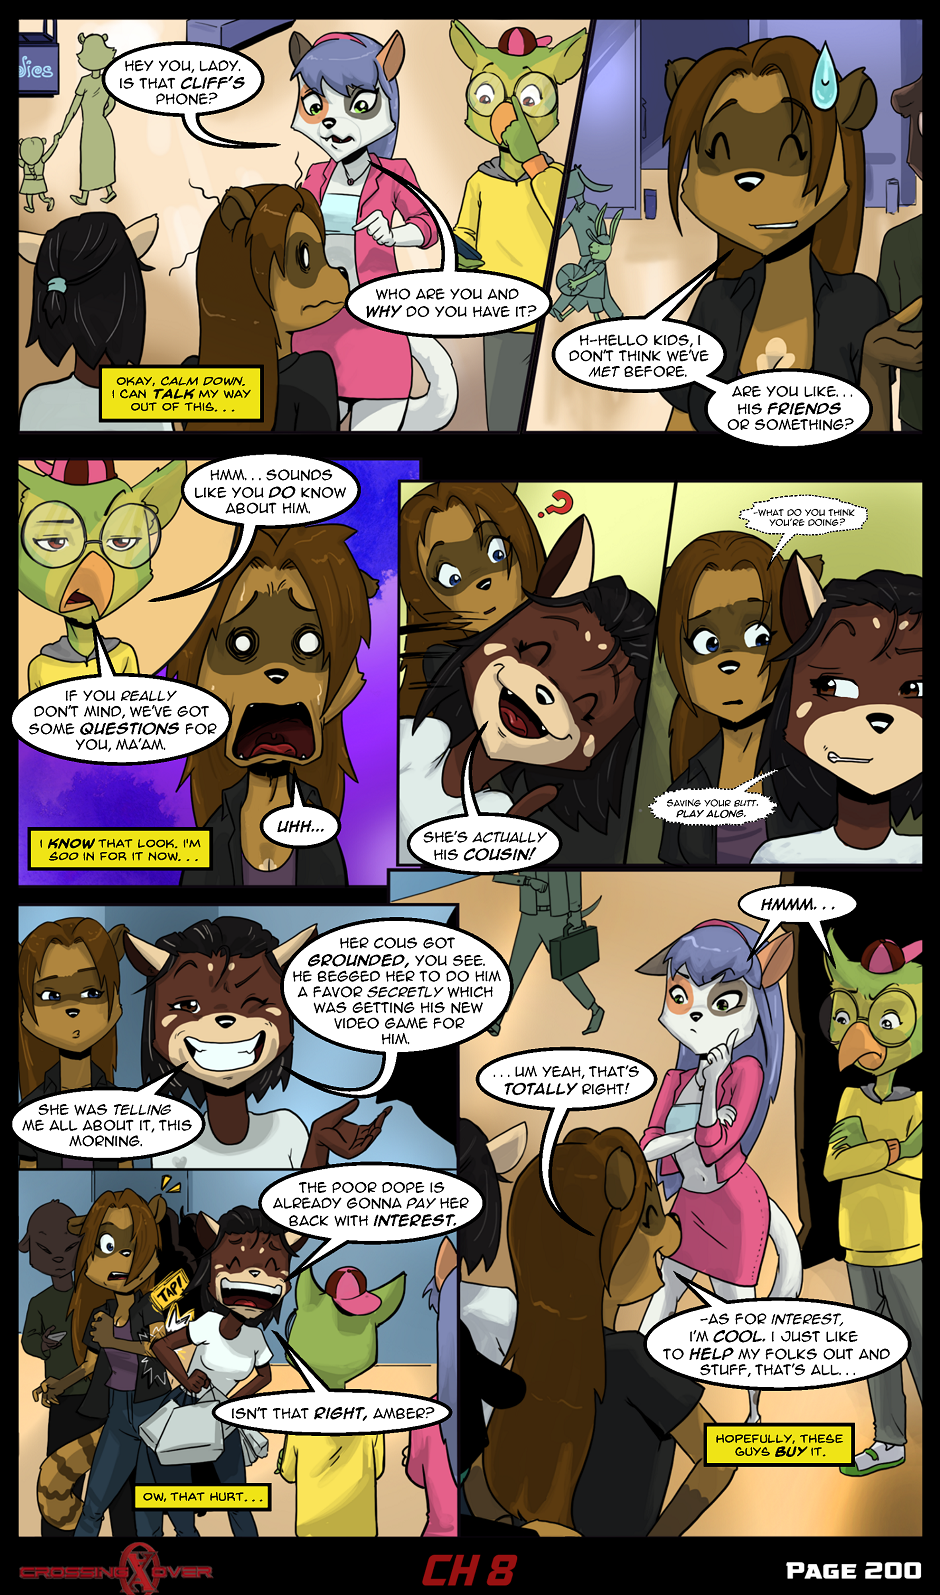 Page 200 (Ch 8)